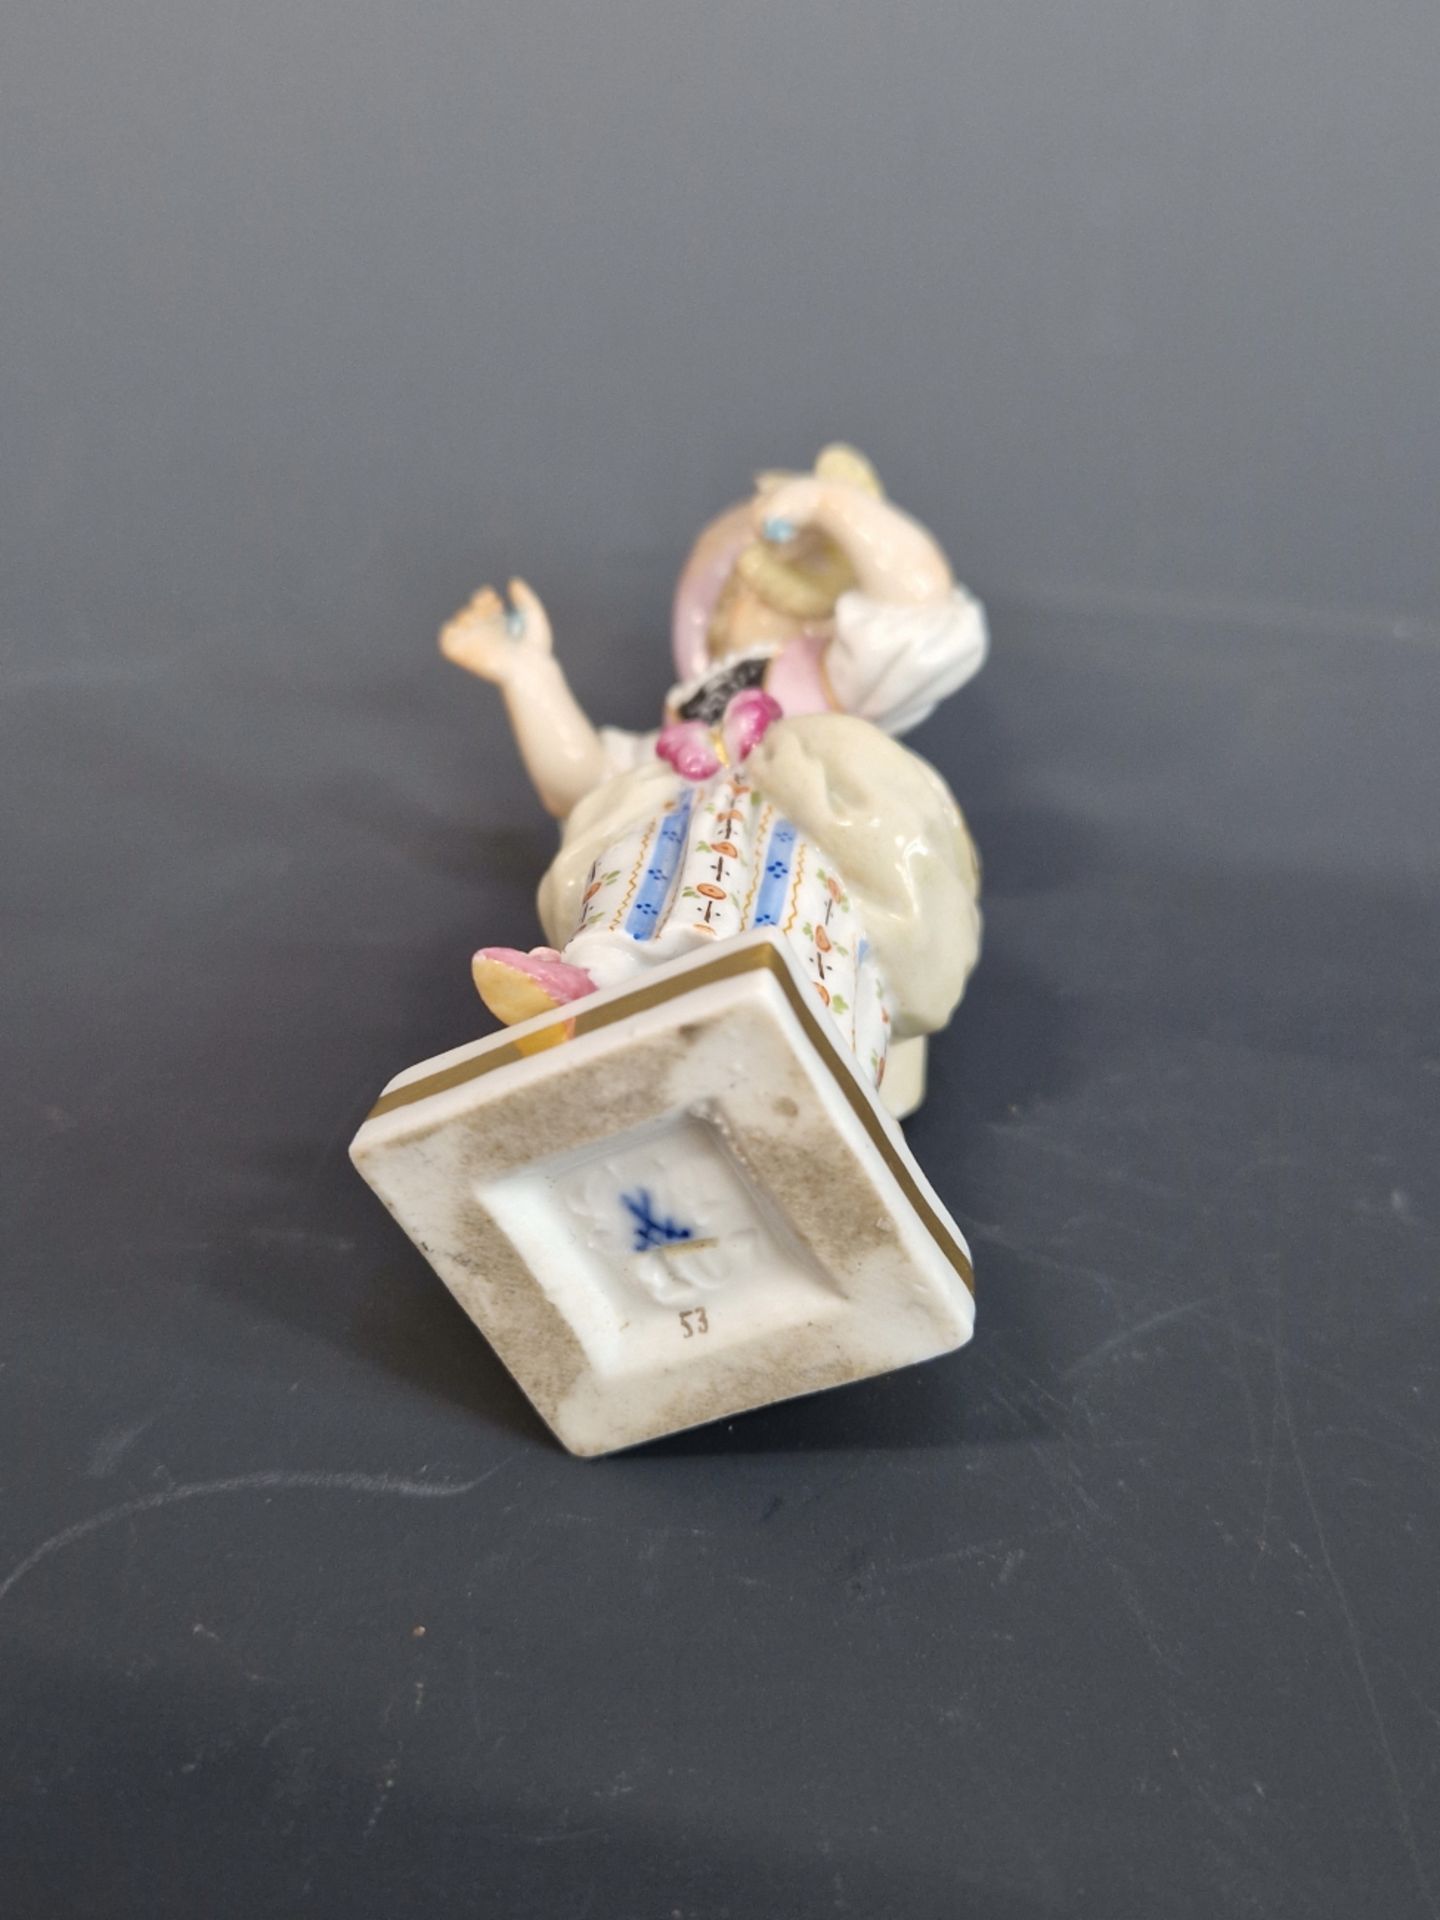 MEISSEN- A SMALL ANTIQUE FUGURINE OF GIRL HOLDING A BIRD. 10 cm HIGH. - Image 5 of 5